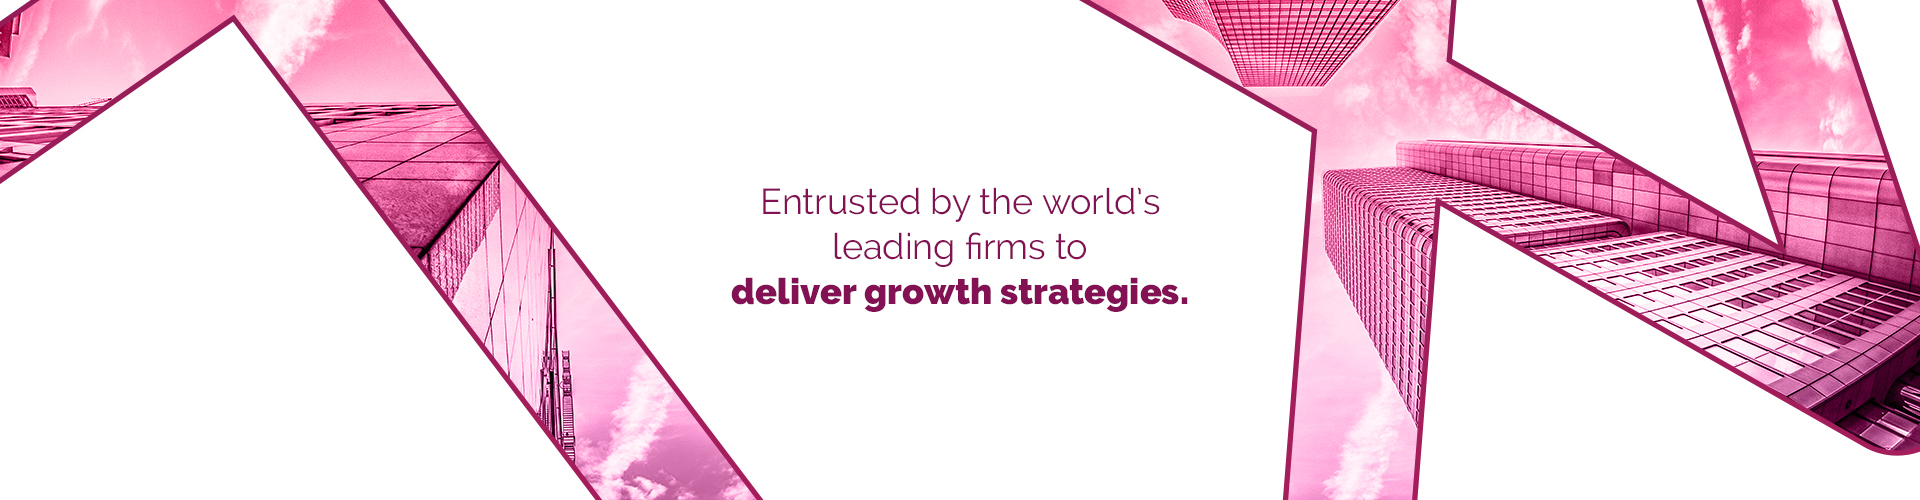 Marsden Group Mergers & Office launches Entrusted by the worlds leading firms to deliver growth strategies